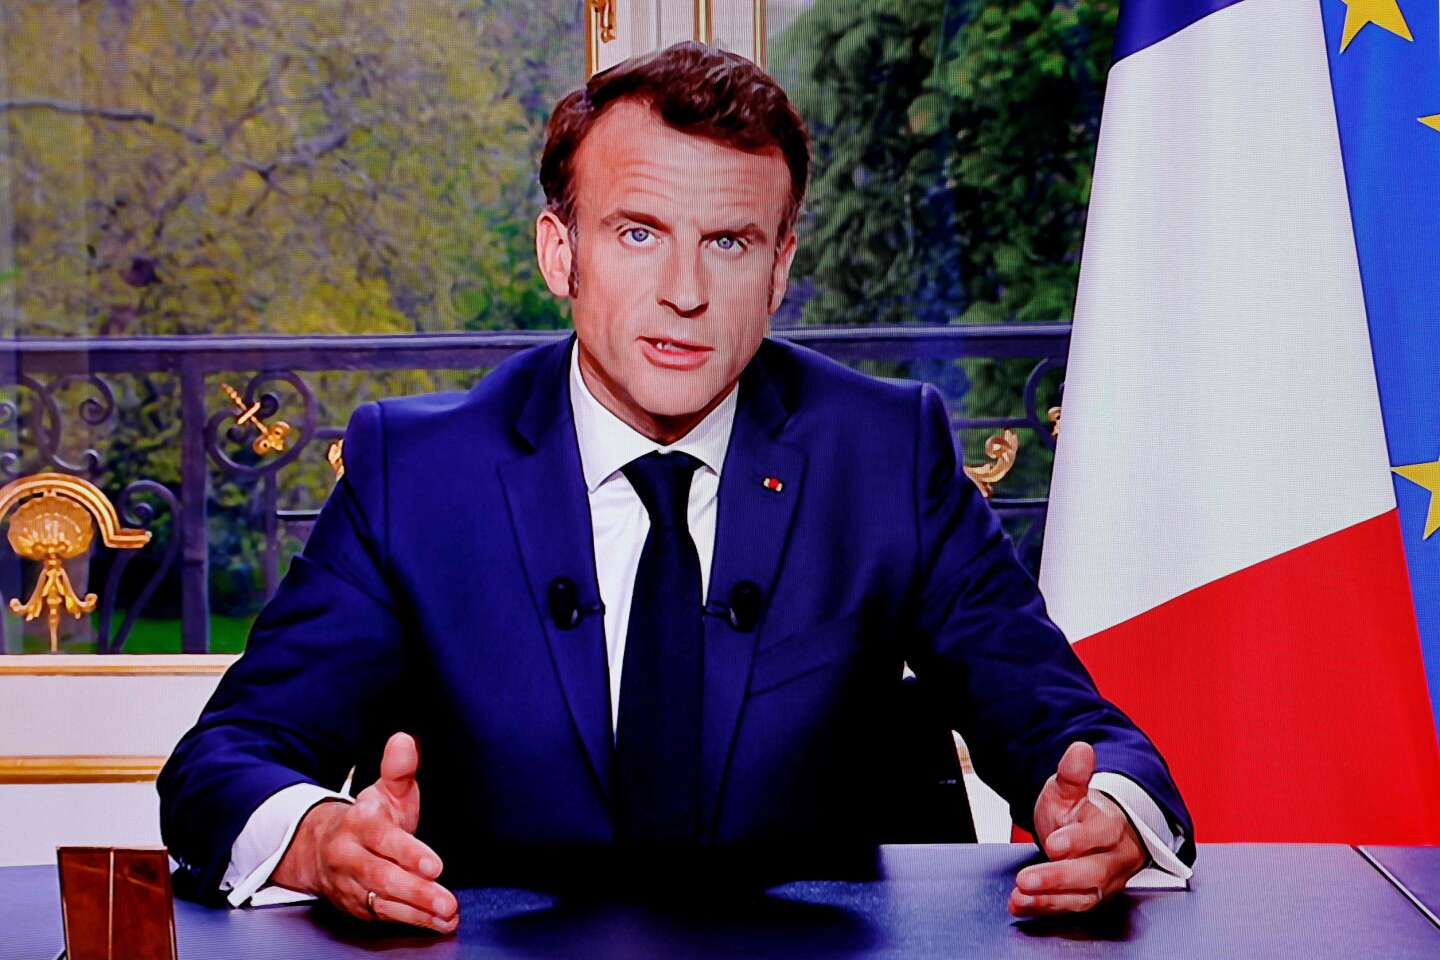 french-pension-reform-macron-calls-for-100-days-of-action-at-the-service-of-france